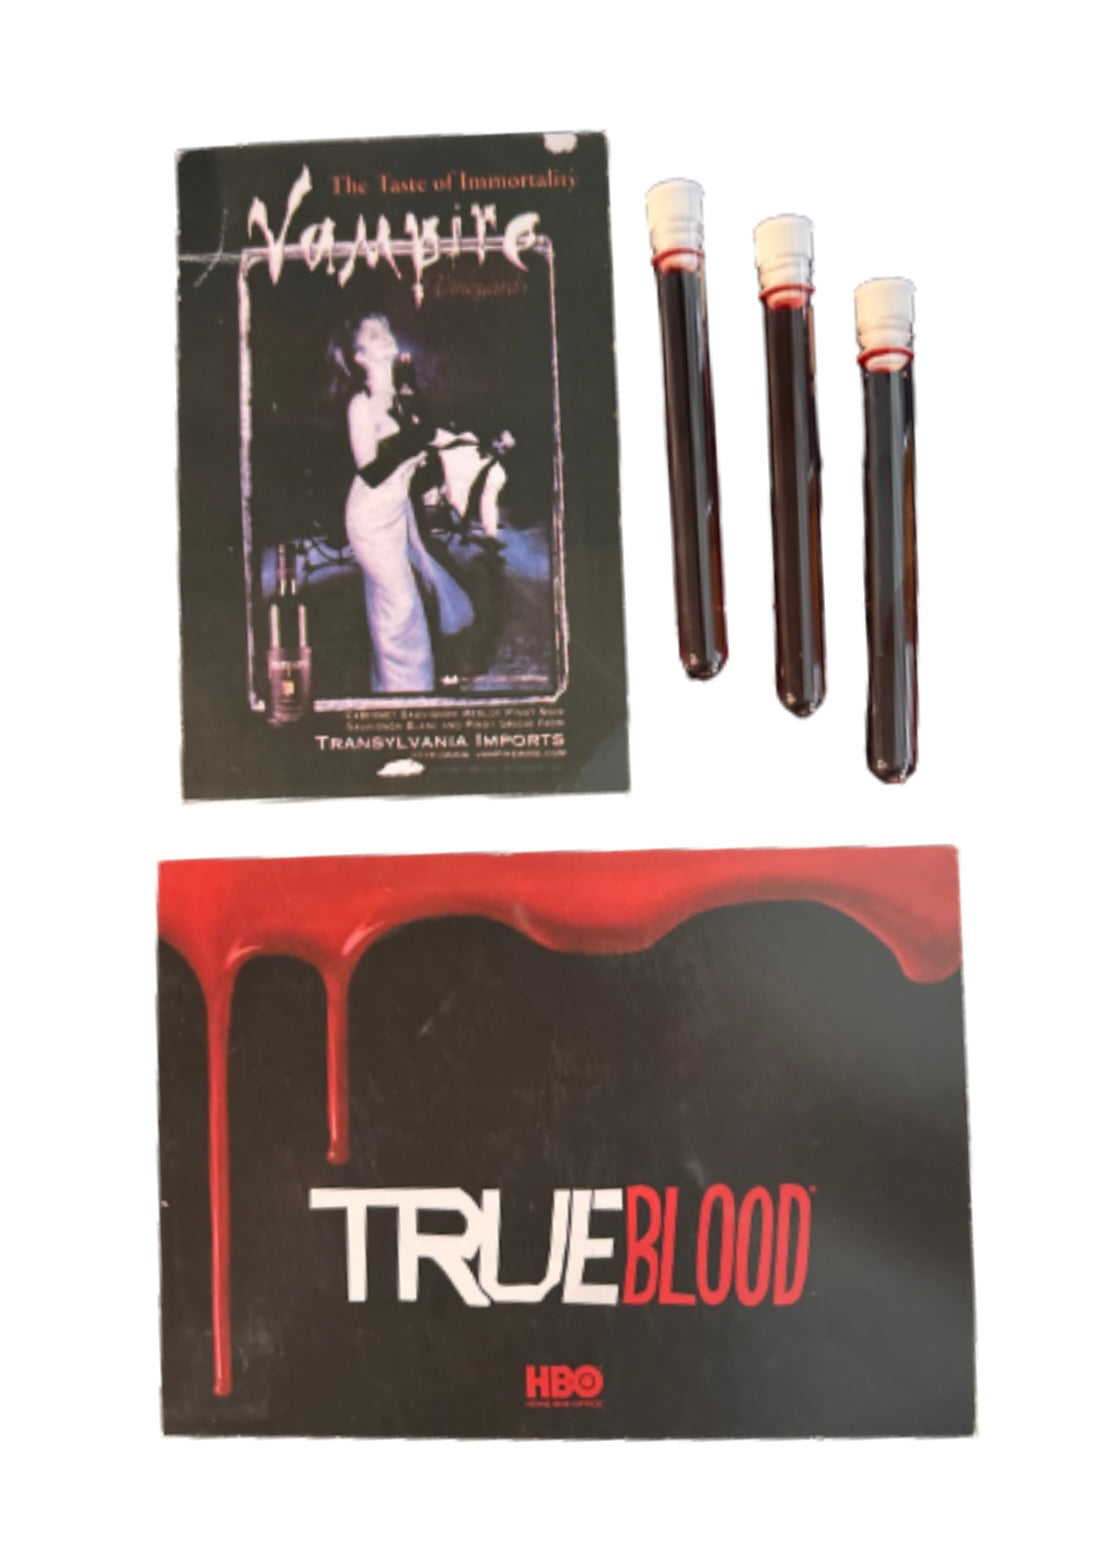 TRUE BLOOD:  Sookie’s Vampire Vineyards Flyer and Blood Vile Containers